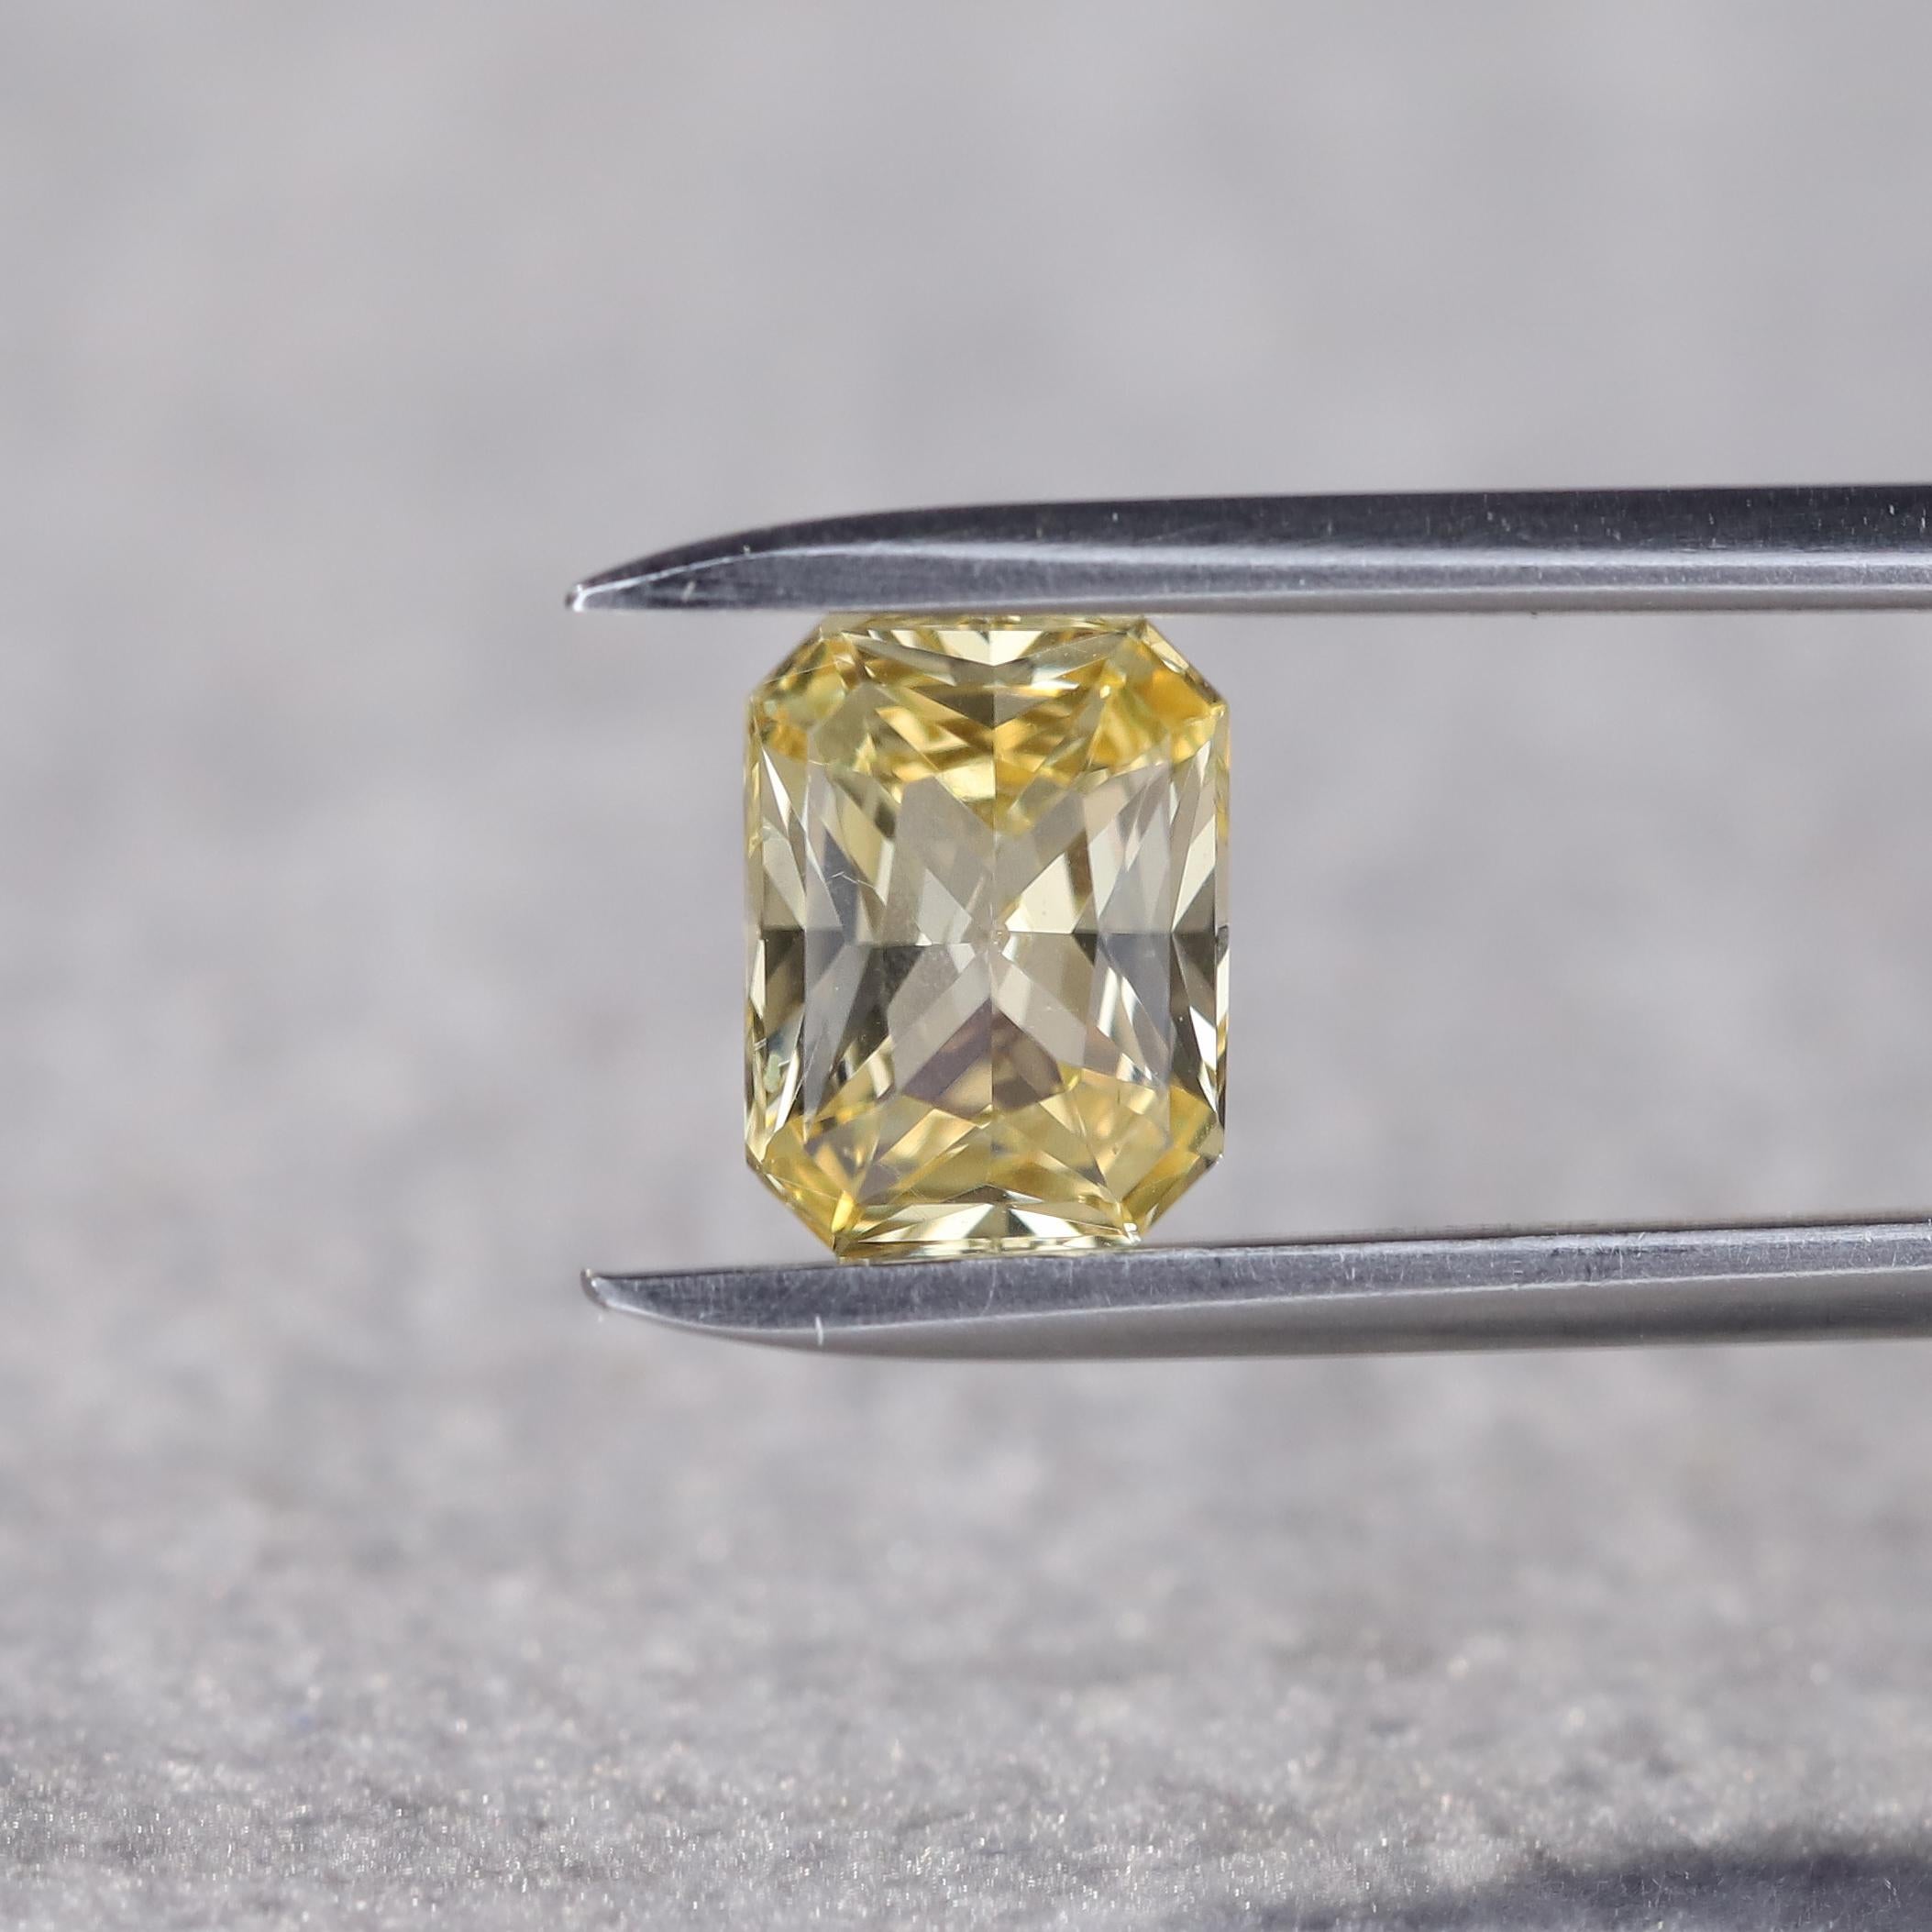 1.62 Carat Radiant Cut Natural Yellow Sapphire Loose Gemstone from Sri Lanka For Sale 1